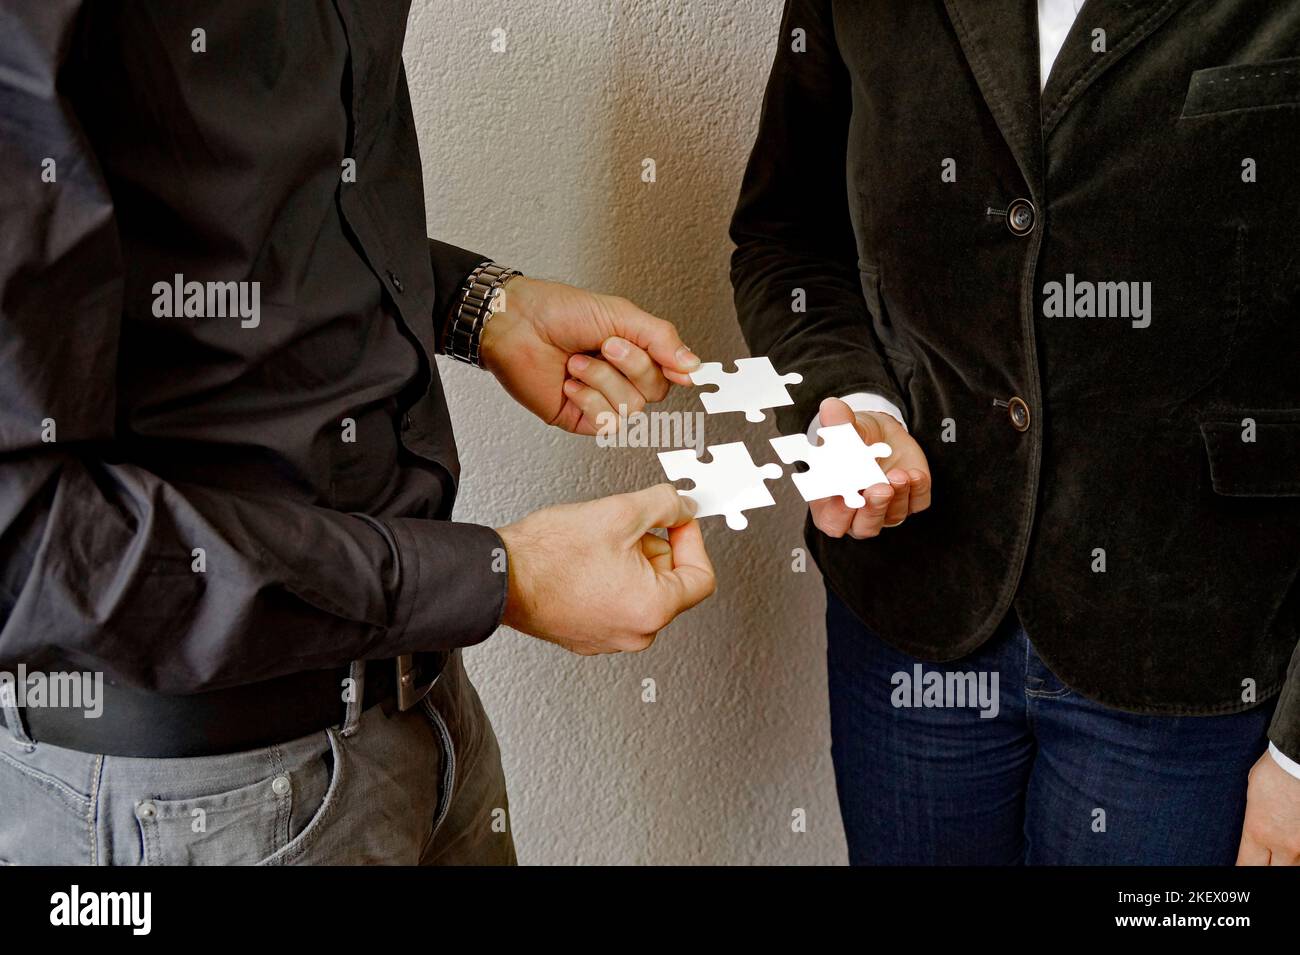 a good collaboration between colleagues or business partners in finding solutions together Stock Photo